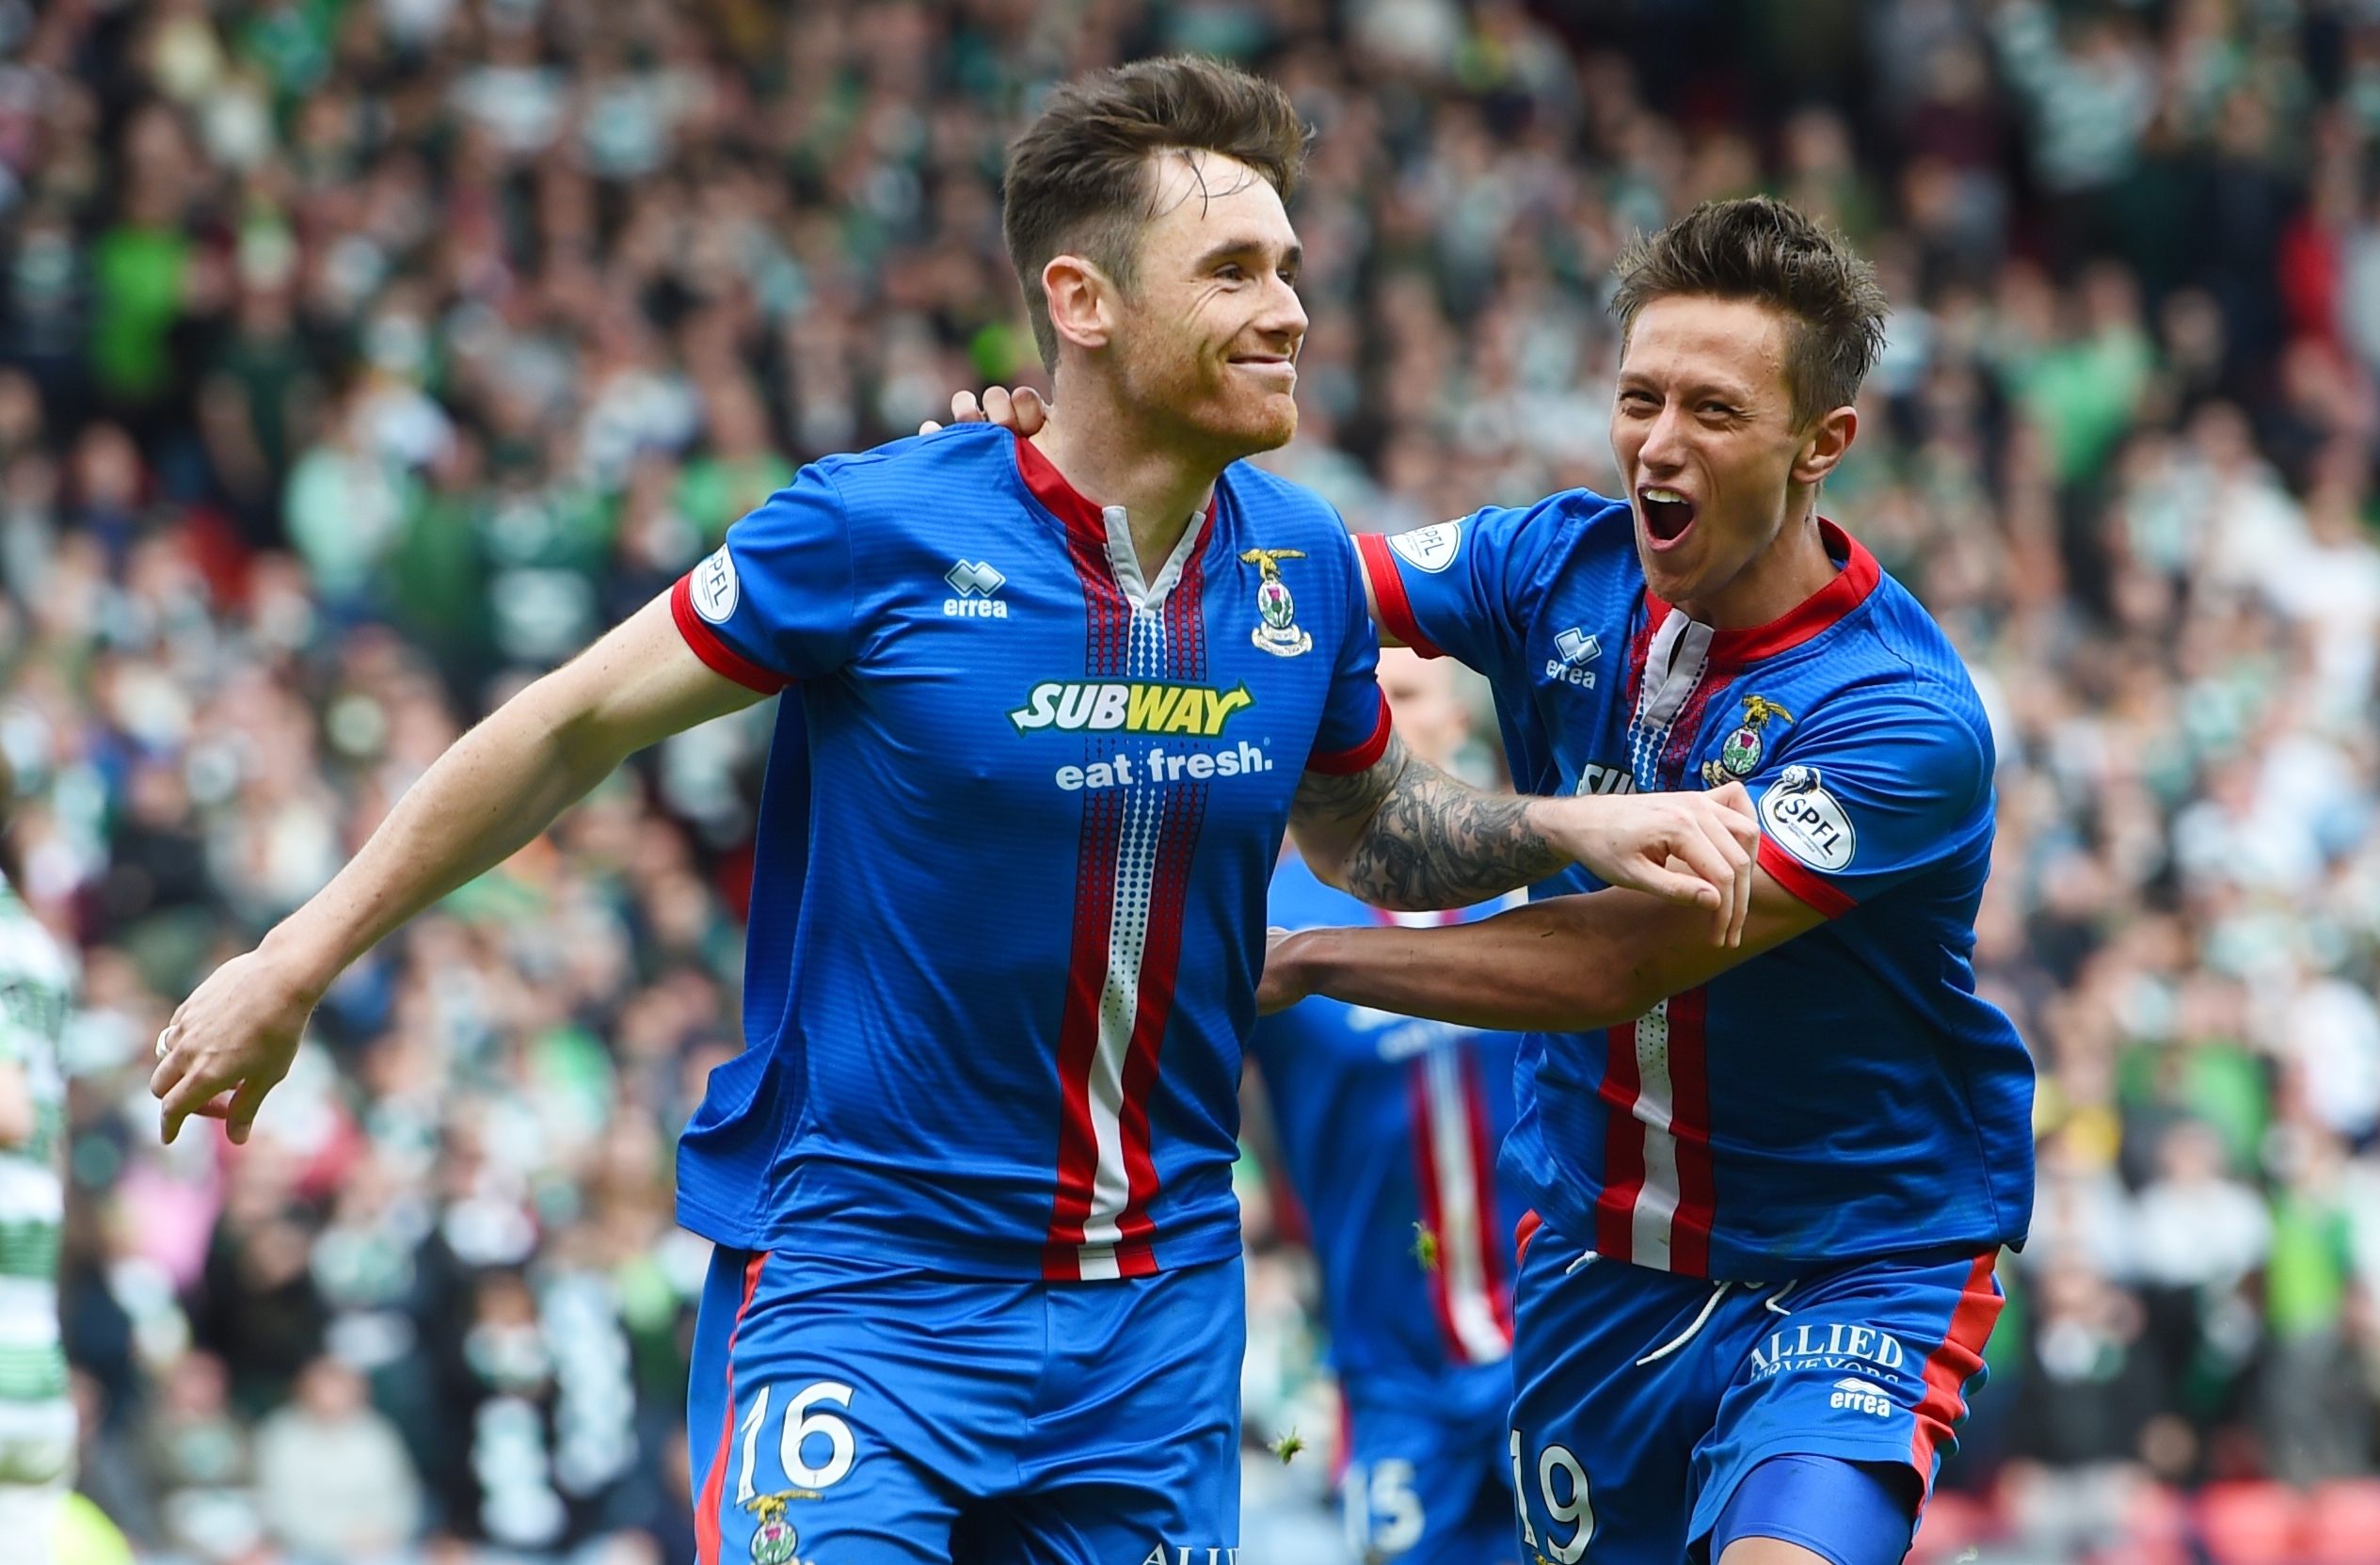 Tansey and Danny Williams celebrate his goal in the Scottish Cup semi-final against Celtic.